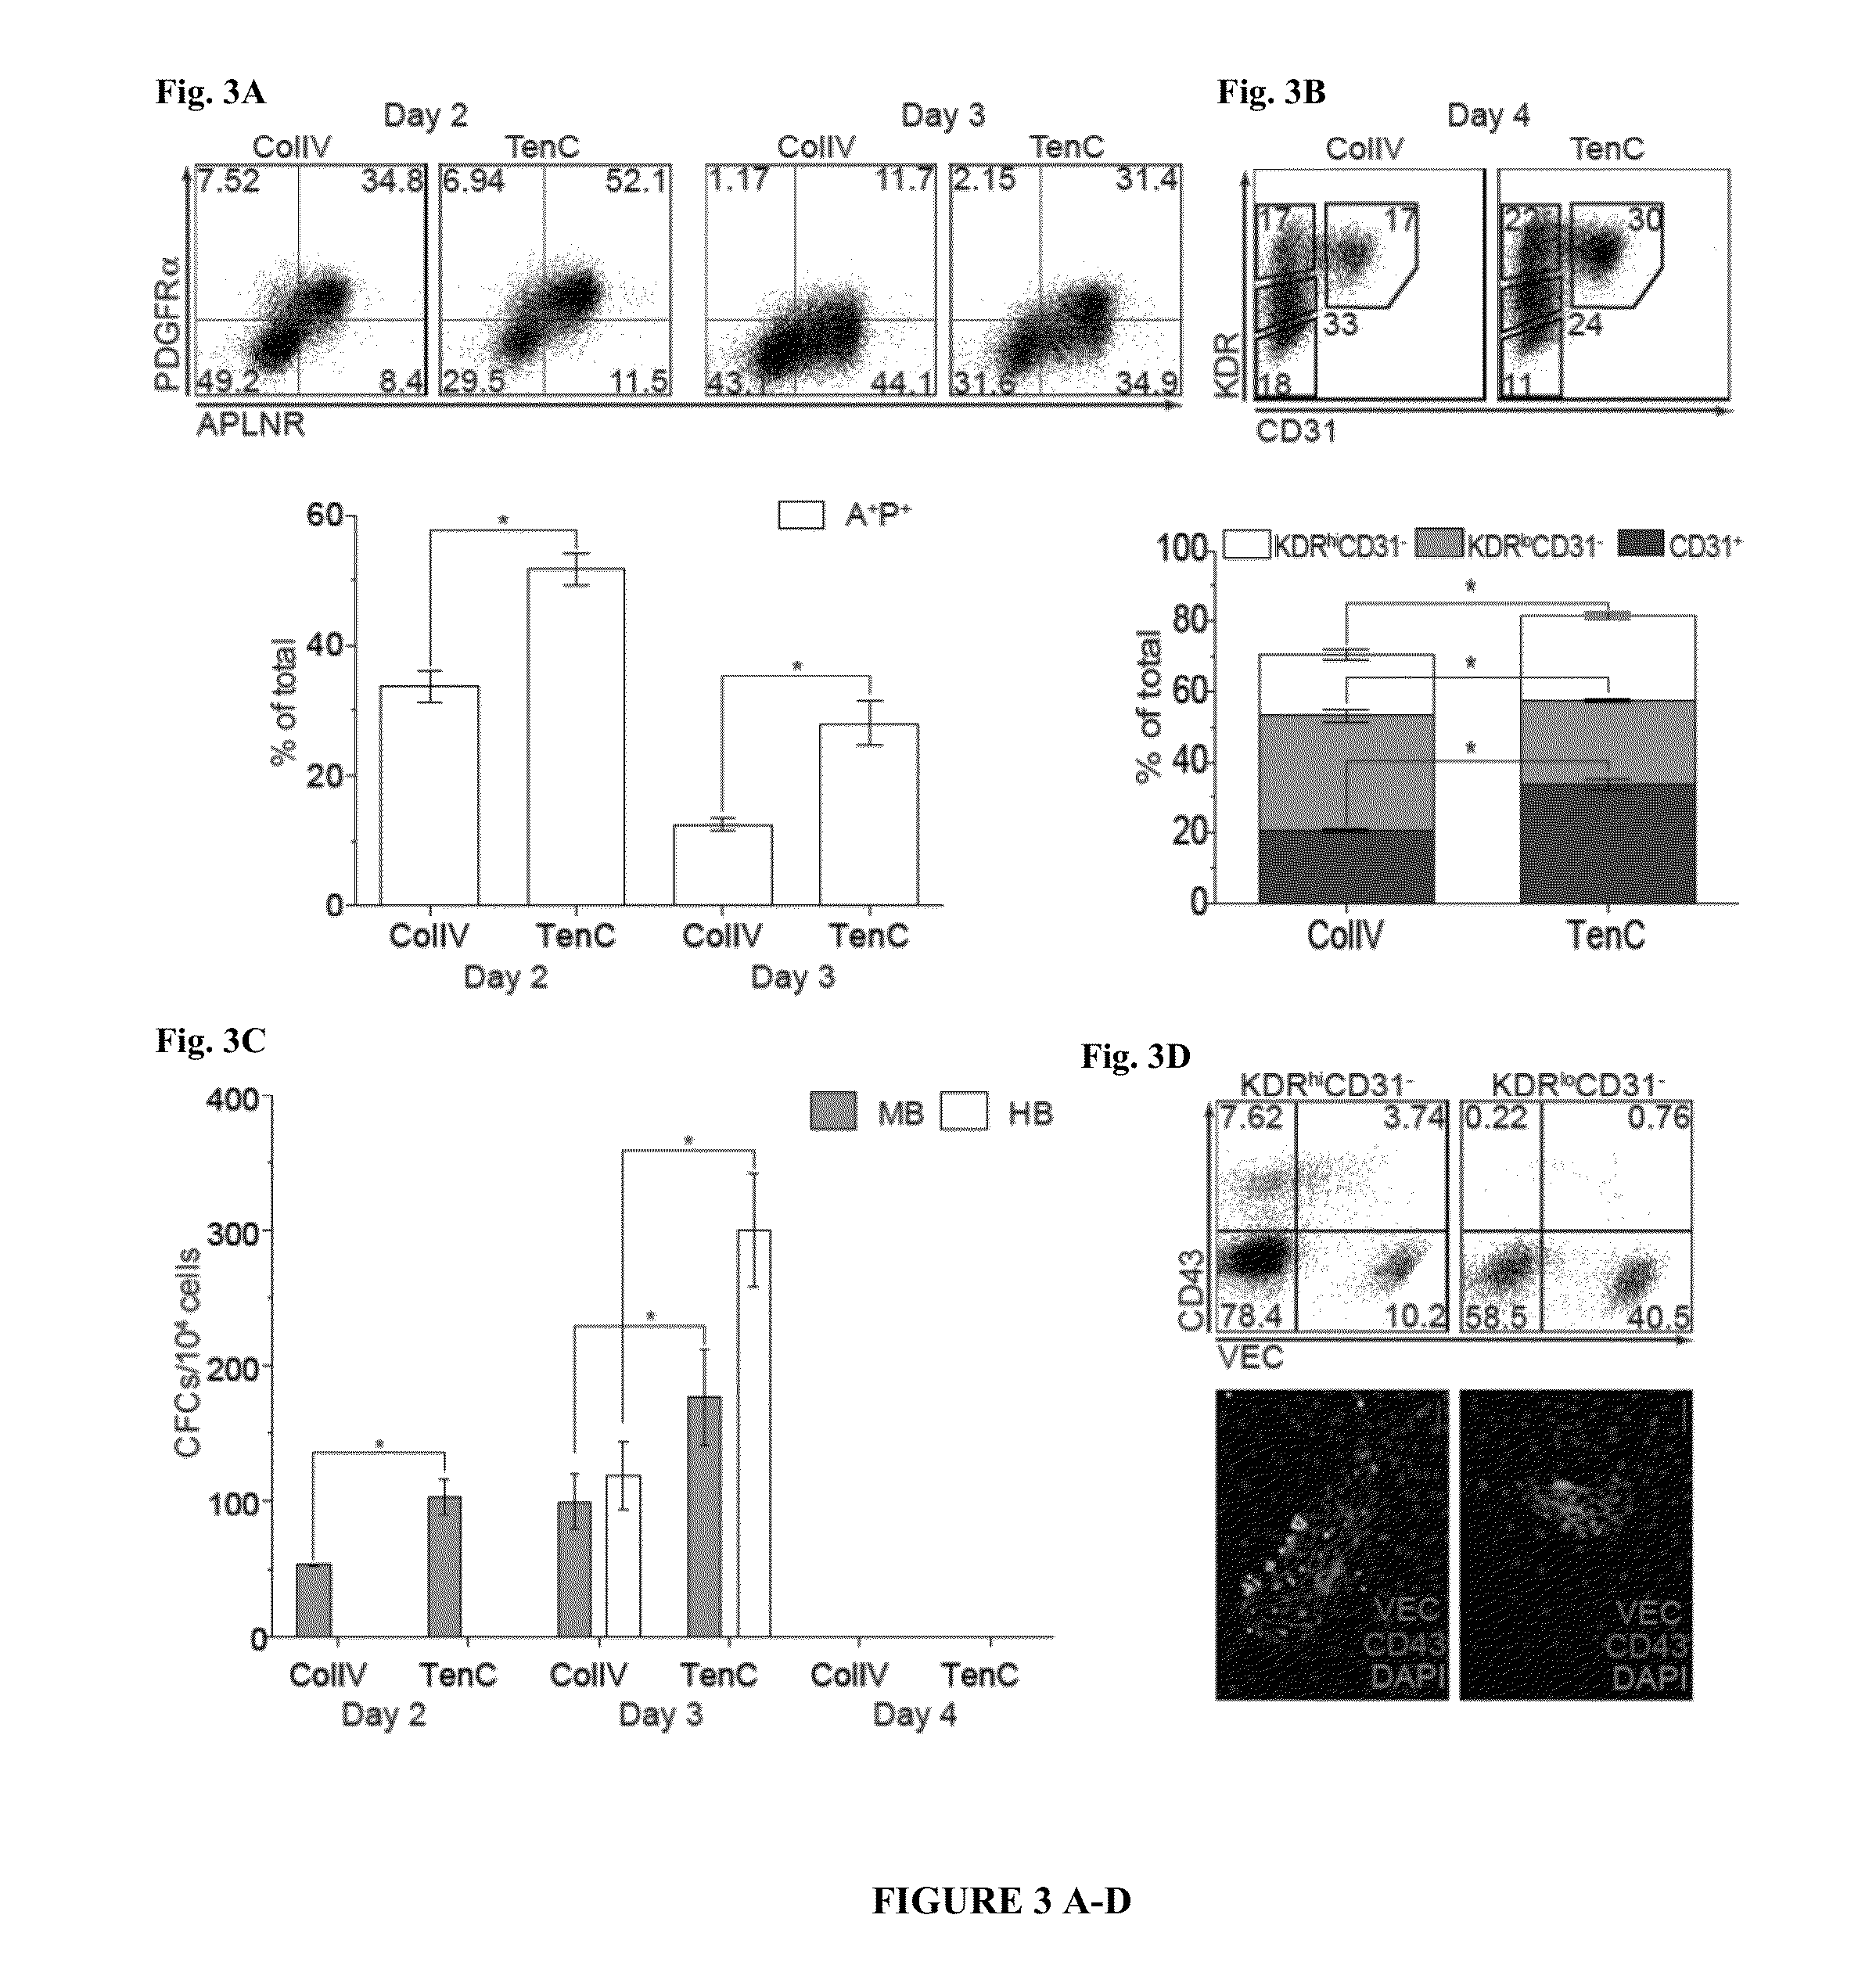 Methods and Materials for Hematoendothelial Differentiation of Human Pluripotent Stem Cells Under Defined Conditions